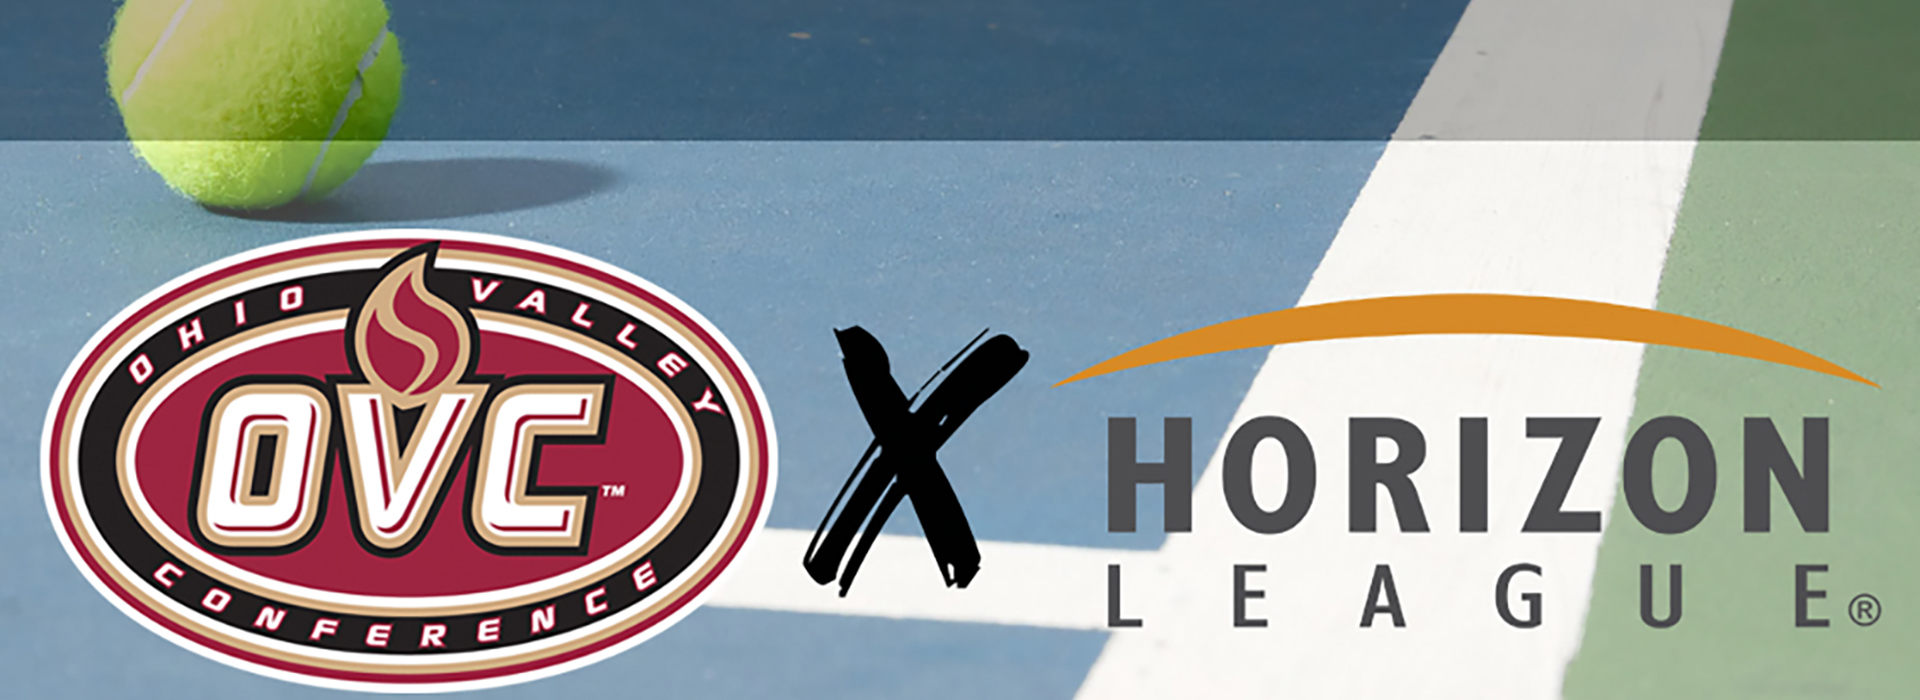 Horizon League and Ohio Valley Conference announce innovative partnership with men’s tennis programs